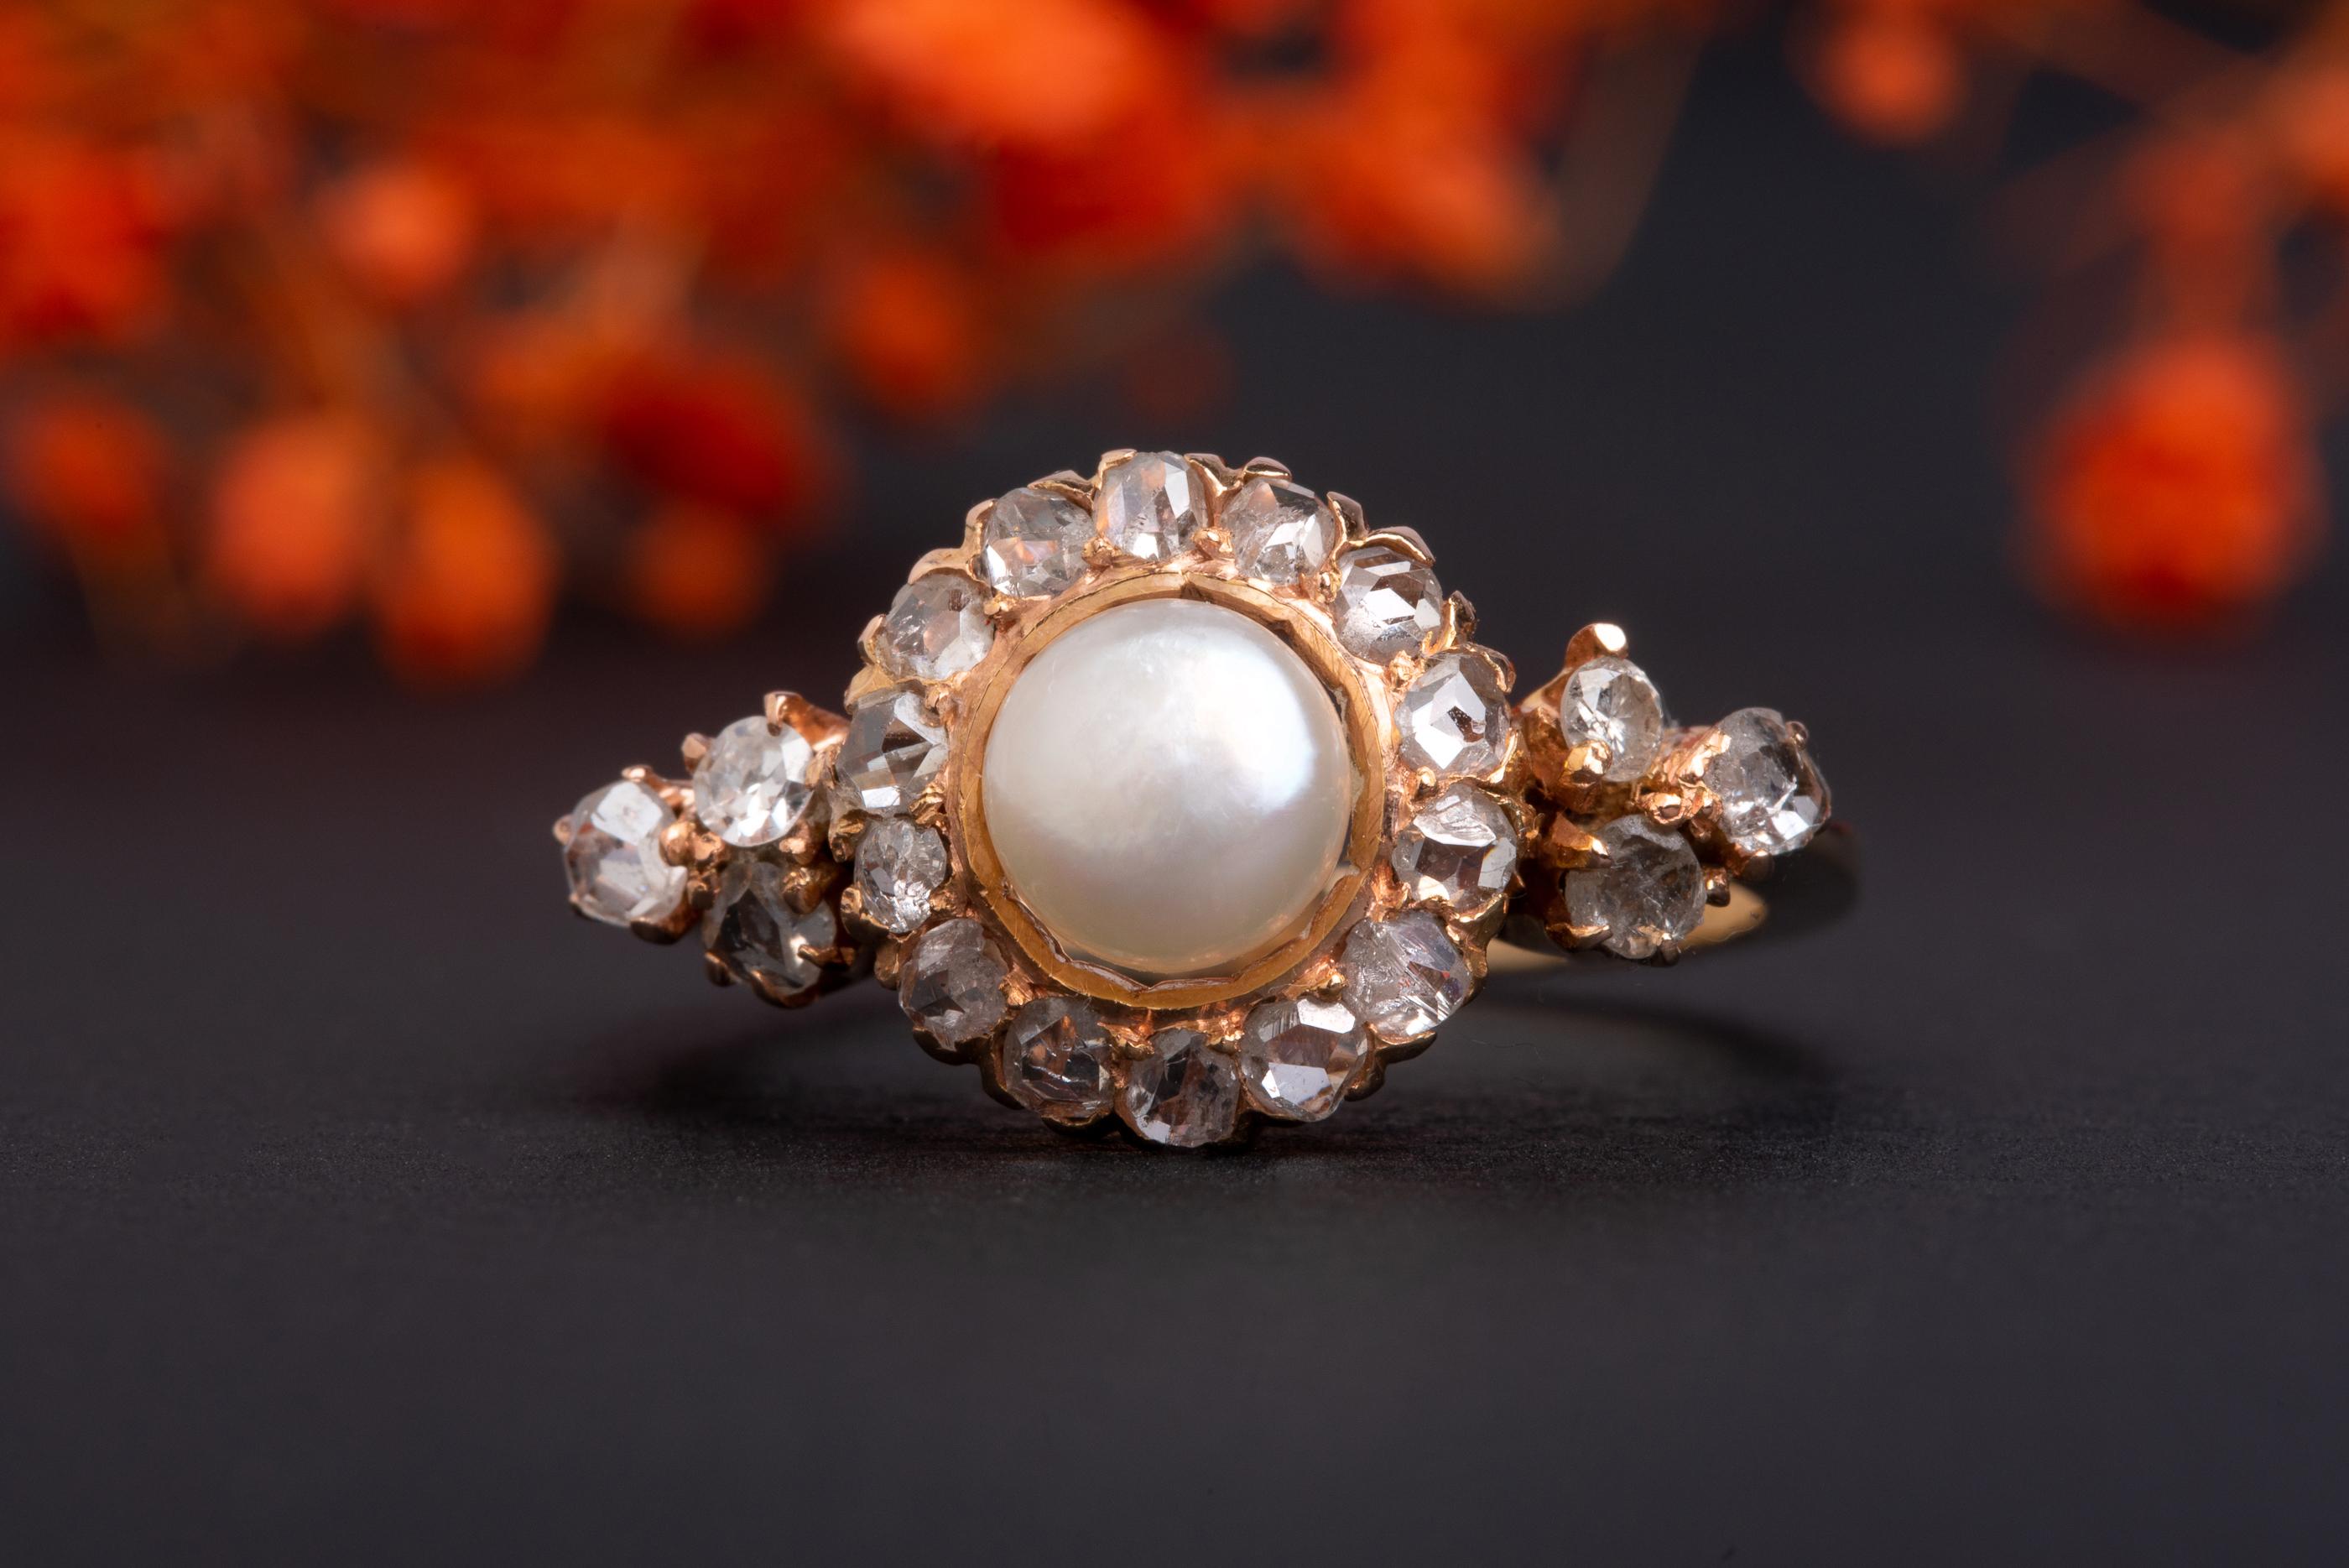 A beautiful and massive (almost 6 grams of solid high carat gold!) vintage diamond set with a lovely snow-white pearl. 

This ring stunning midcentury comes from a private collection in Italy and is preserved in an outstanding condition. It is now